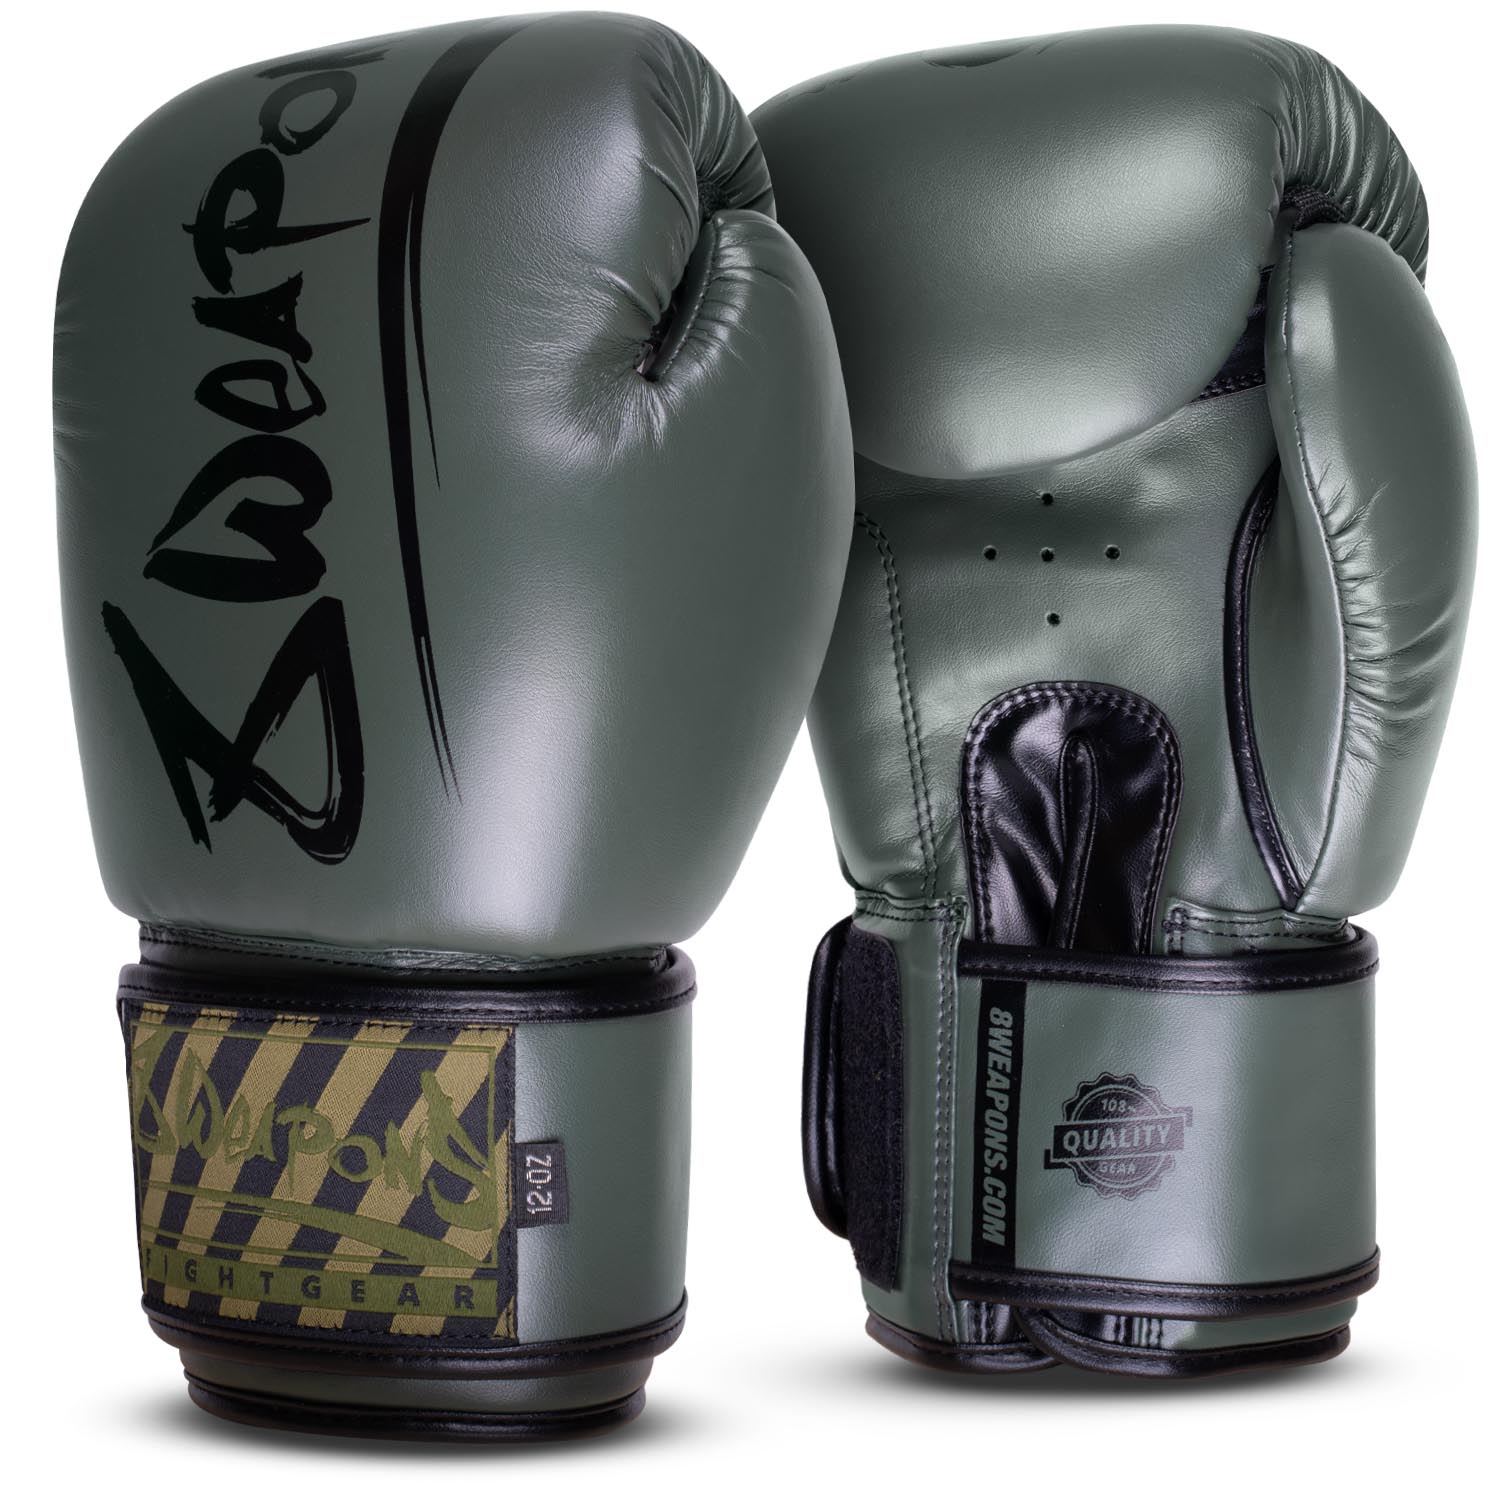 8 WEAPONS Boxing Gloves, Unlimited 2.0, olive-black